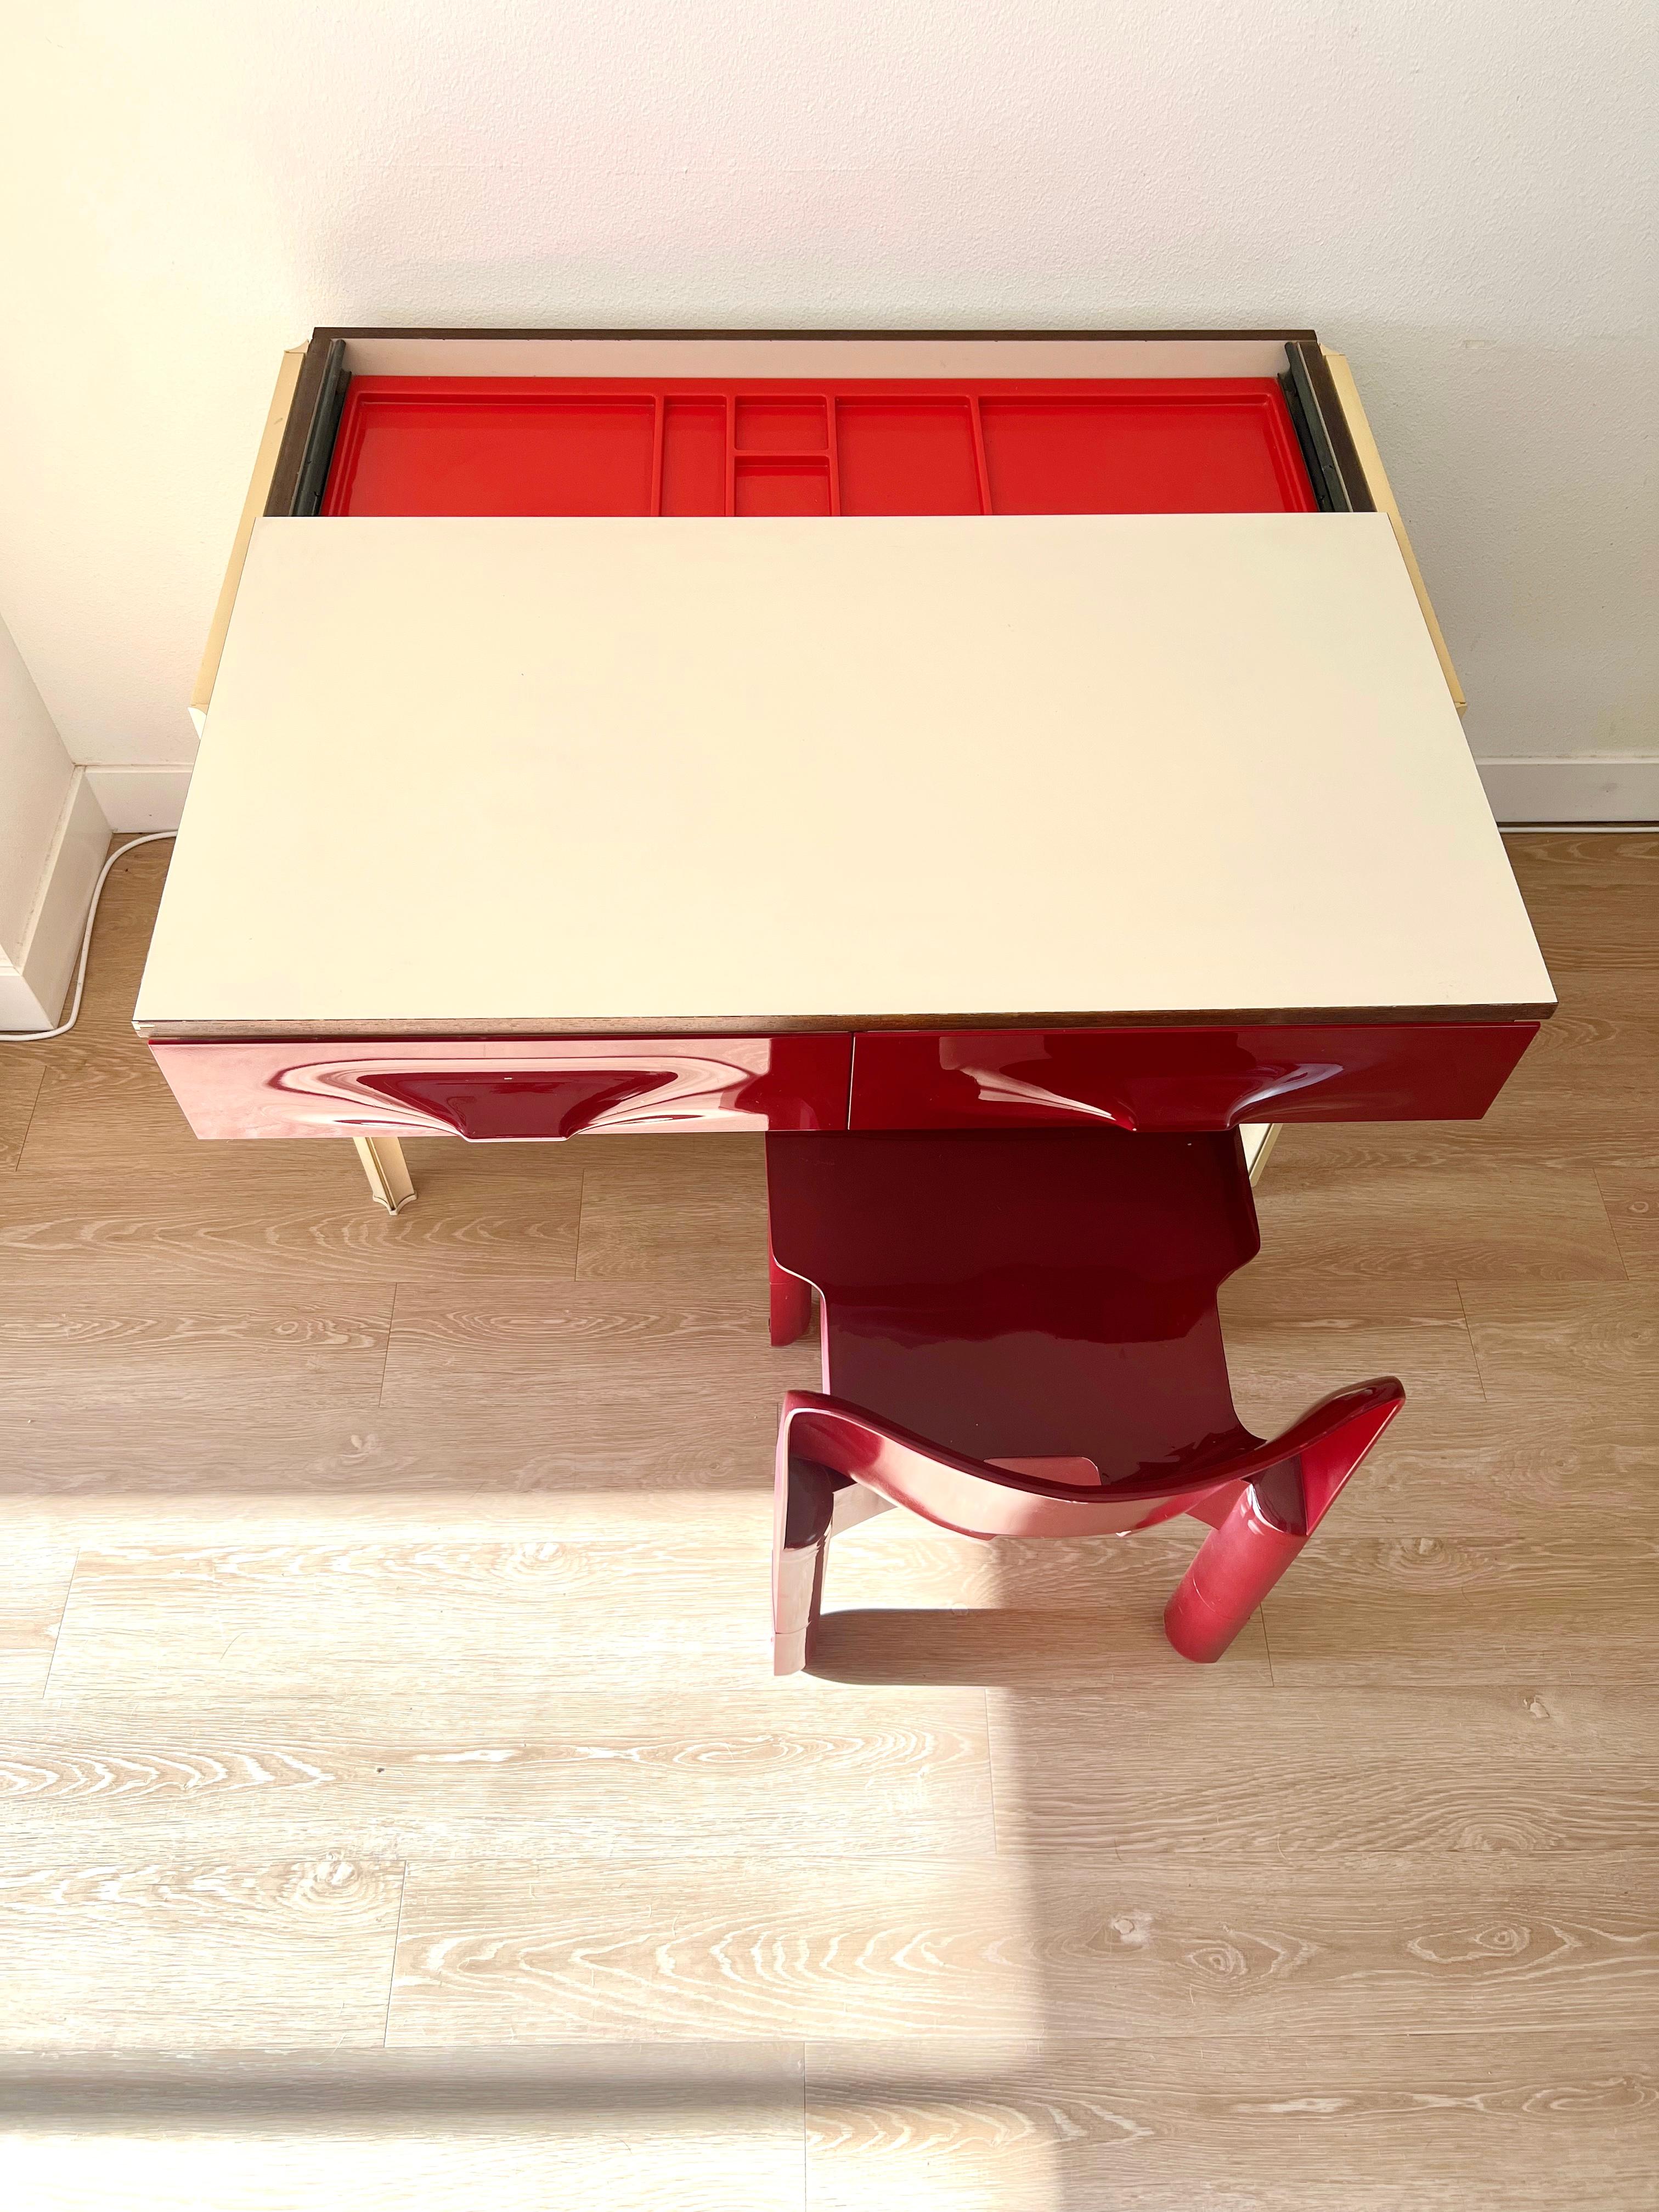 This Df-2000 desk Designed By Raymond Loewy For Doubinsky Freres is compact, vibrant and sturdy. It has a shelving compartment underneath that can be adjusted in height and a few large drawers with plenty of space for storage. The top compartment of